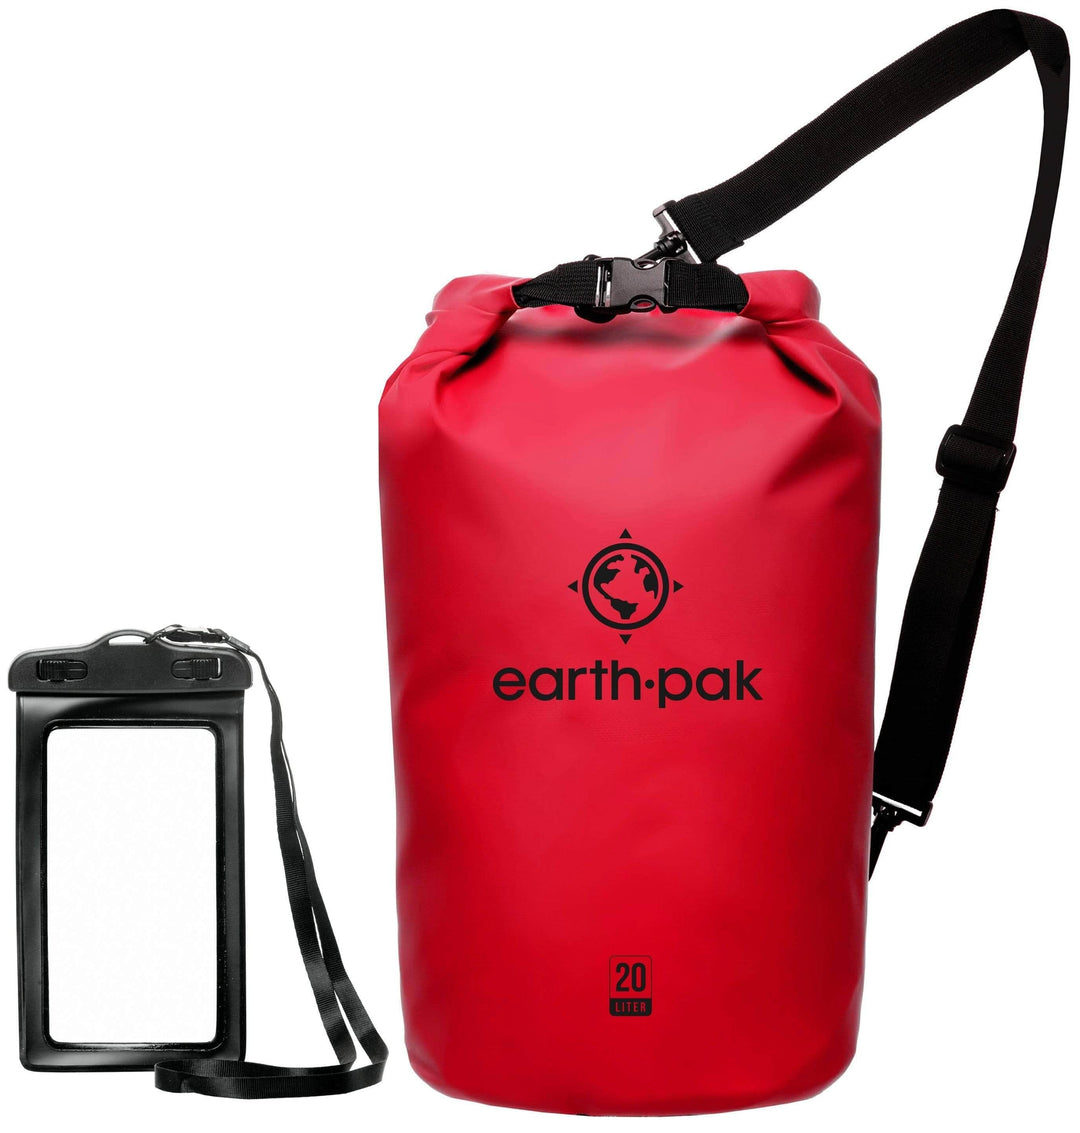 Outdoor Products, 20L Valuables Watertight Dry Bag , Clear, Water Sport Bag